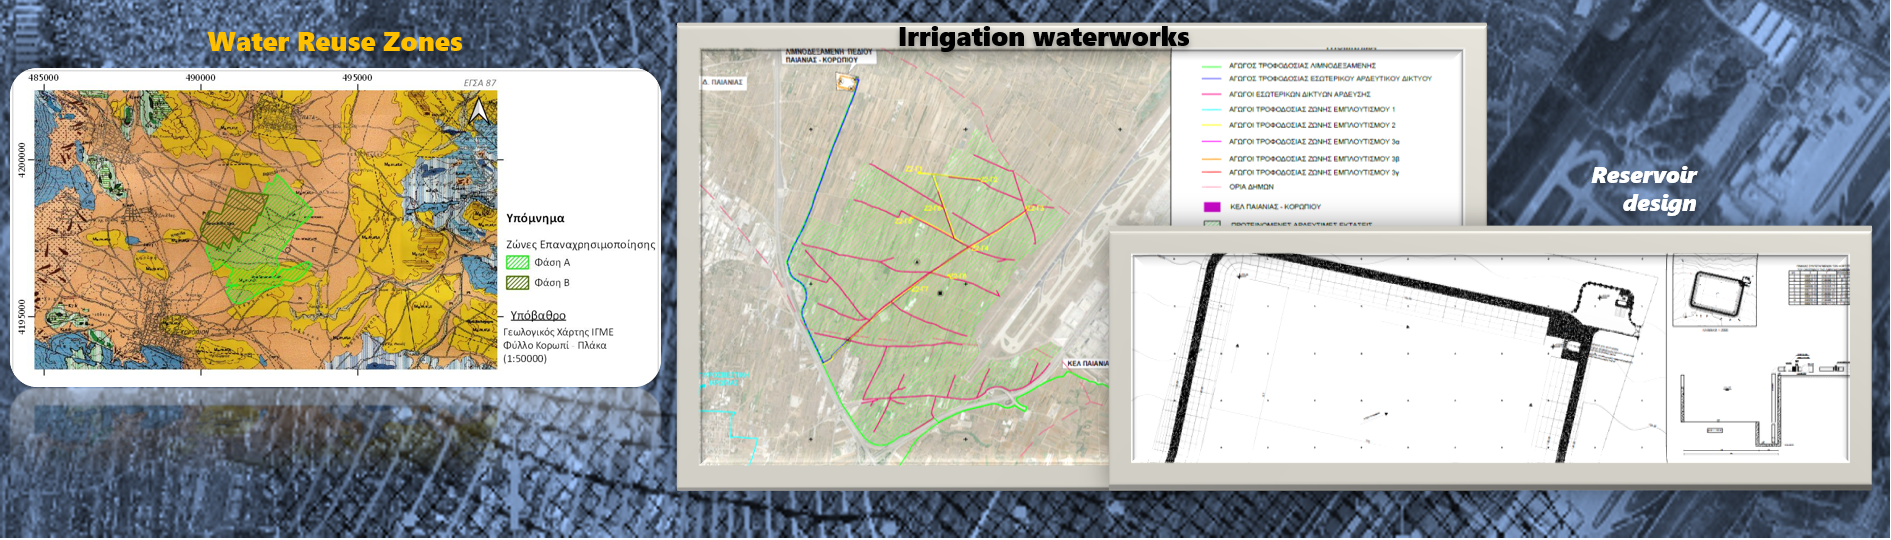 Reuse of the SWTP outflows for unlimited irrigation – network design